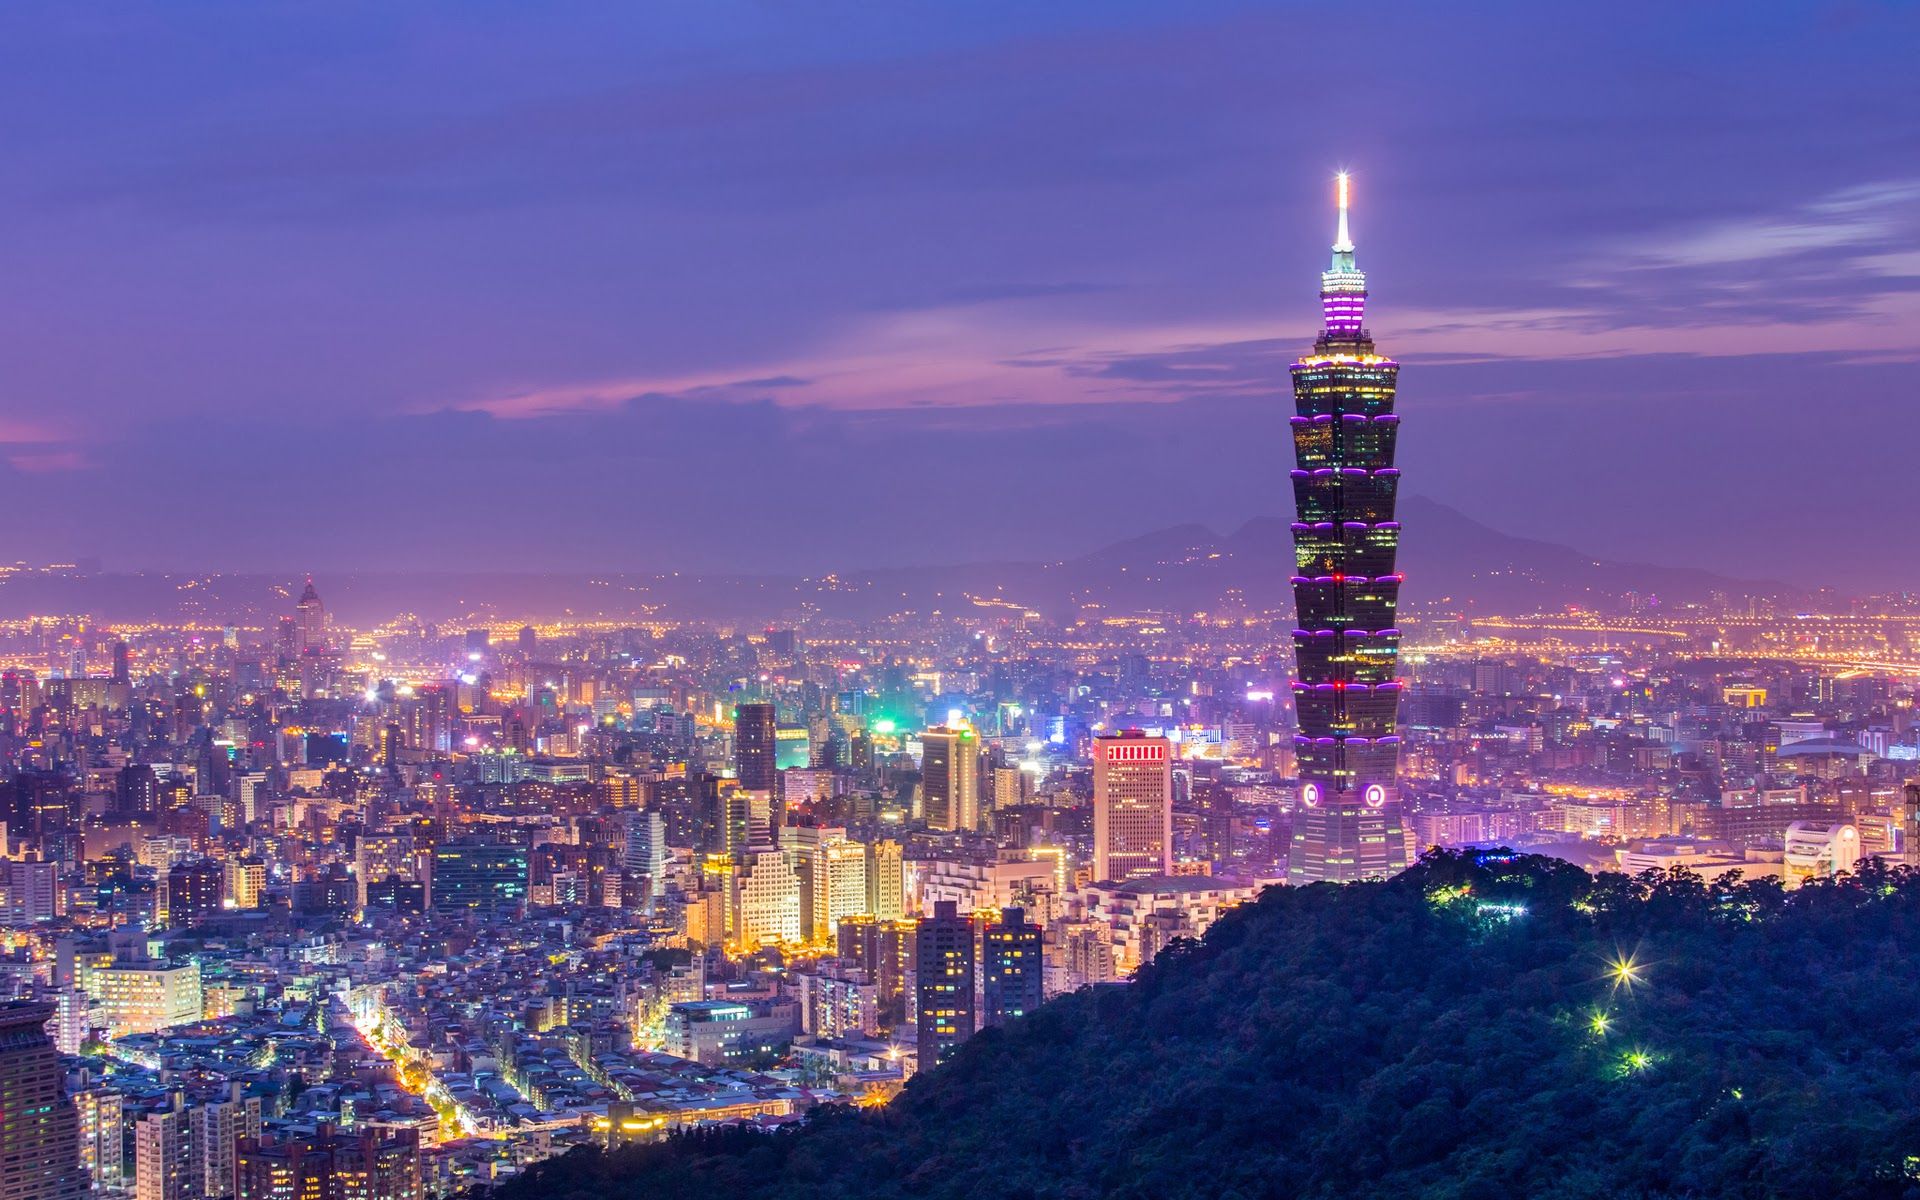 Taipei 101 City View Wallpaper - Travel HD Backgrounds